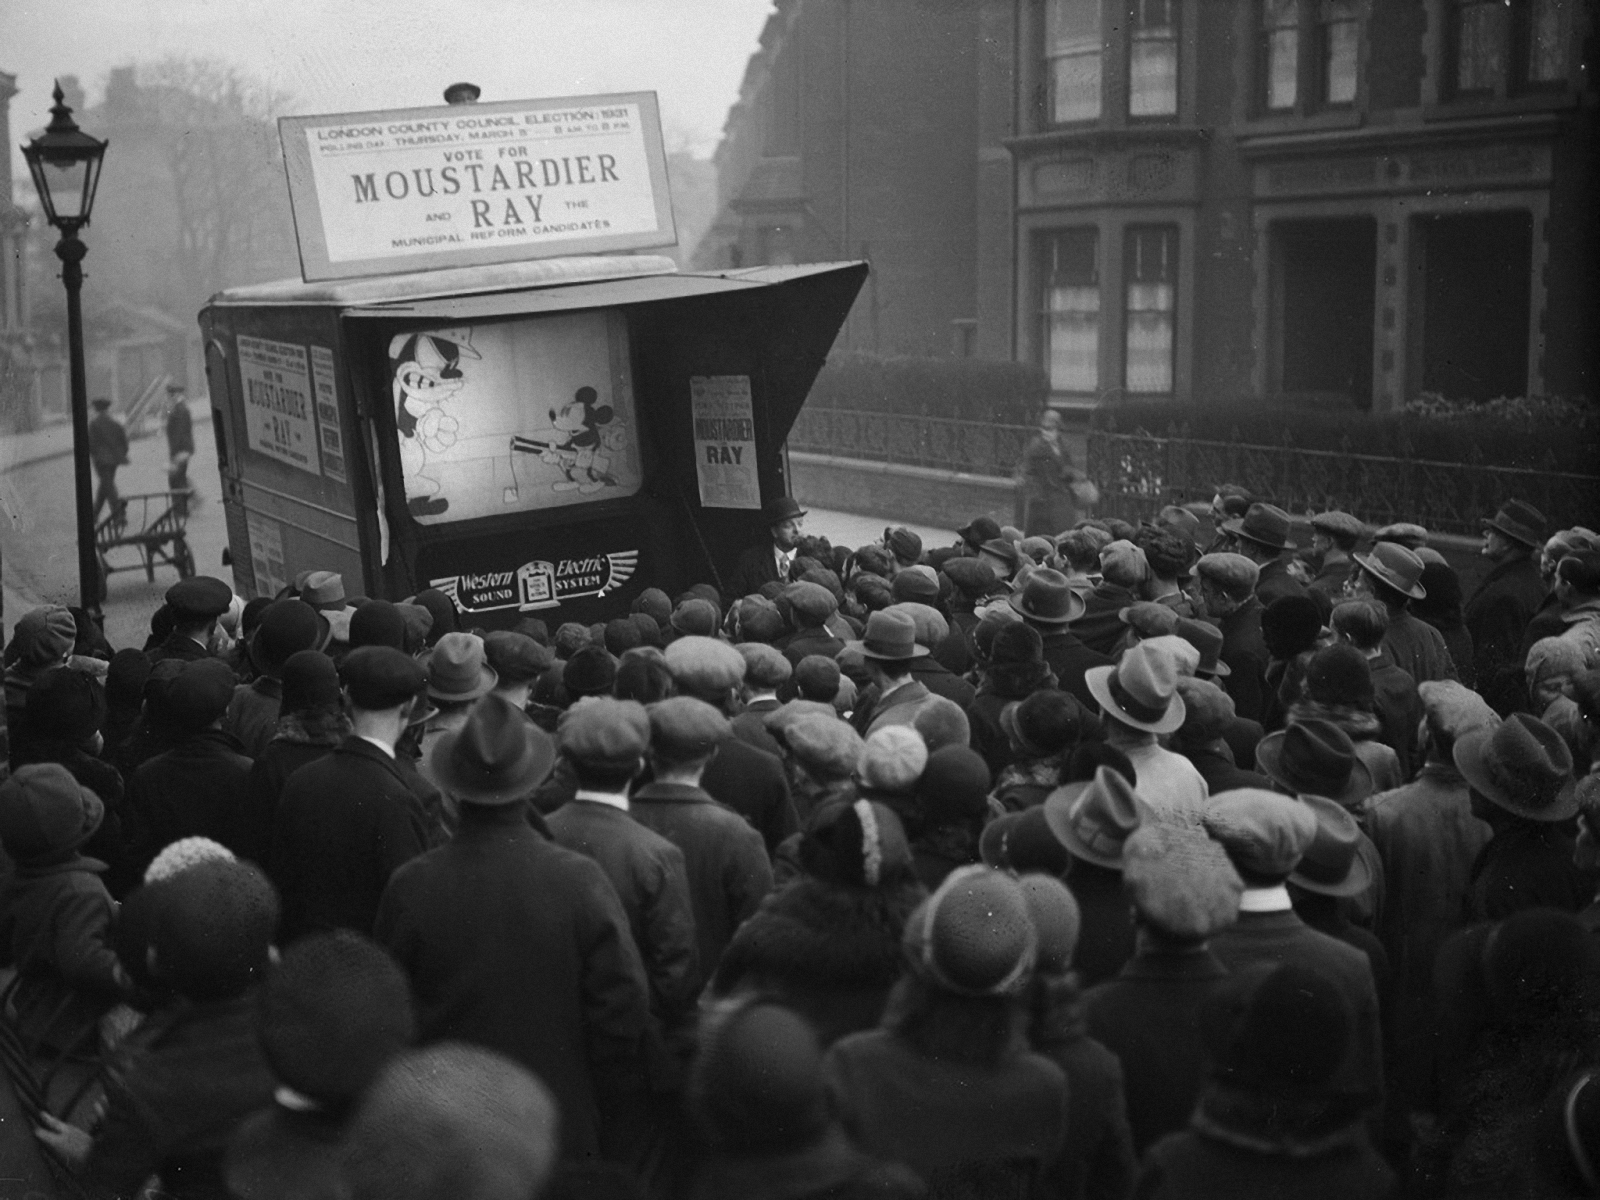 mickey-mouse-in-the-election-campaign-london-county-council-to-attract-voters-february-26-1931-england-by-fox-photos.jpg